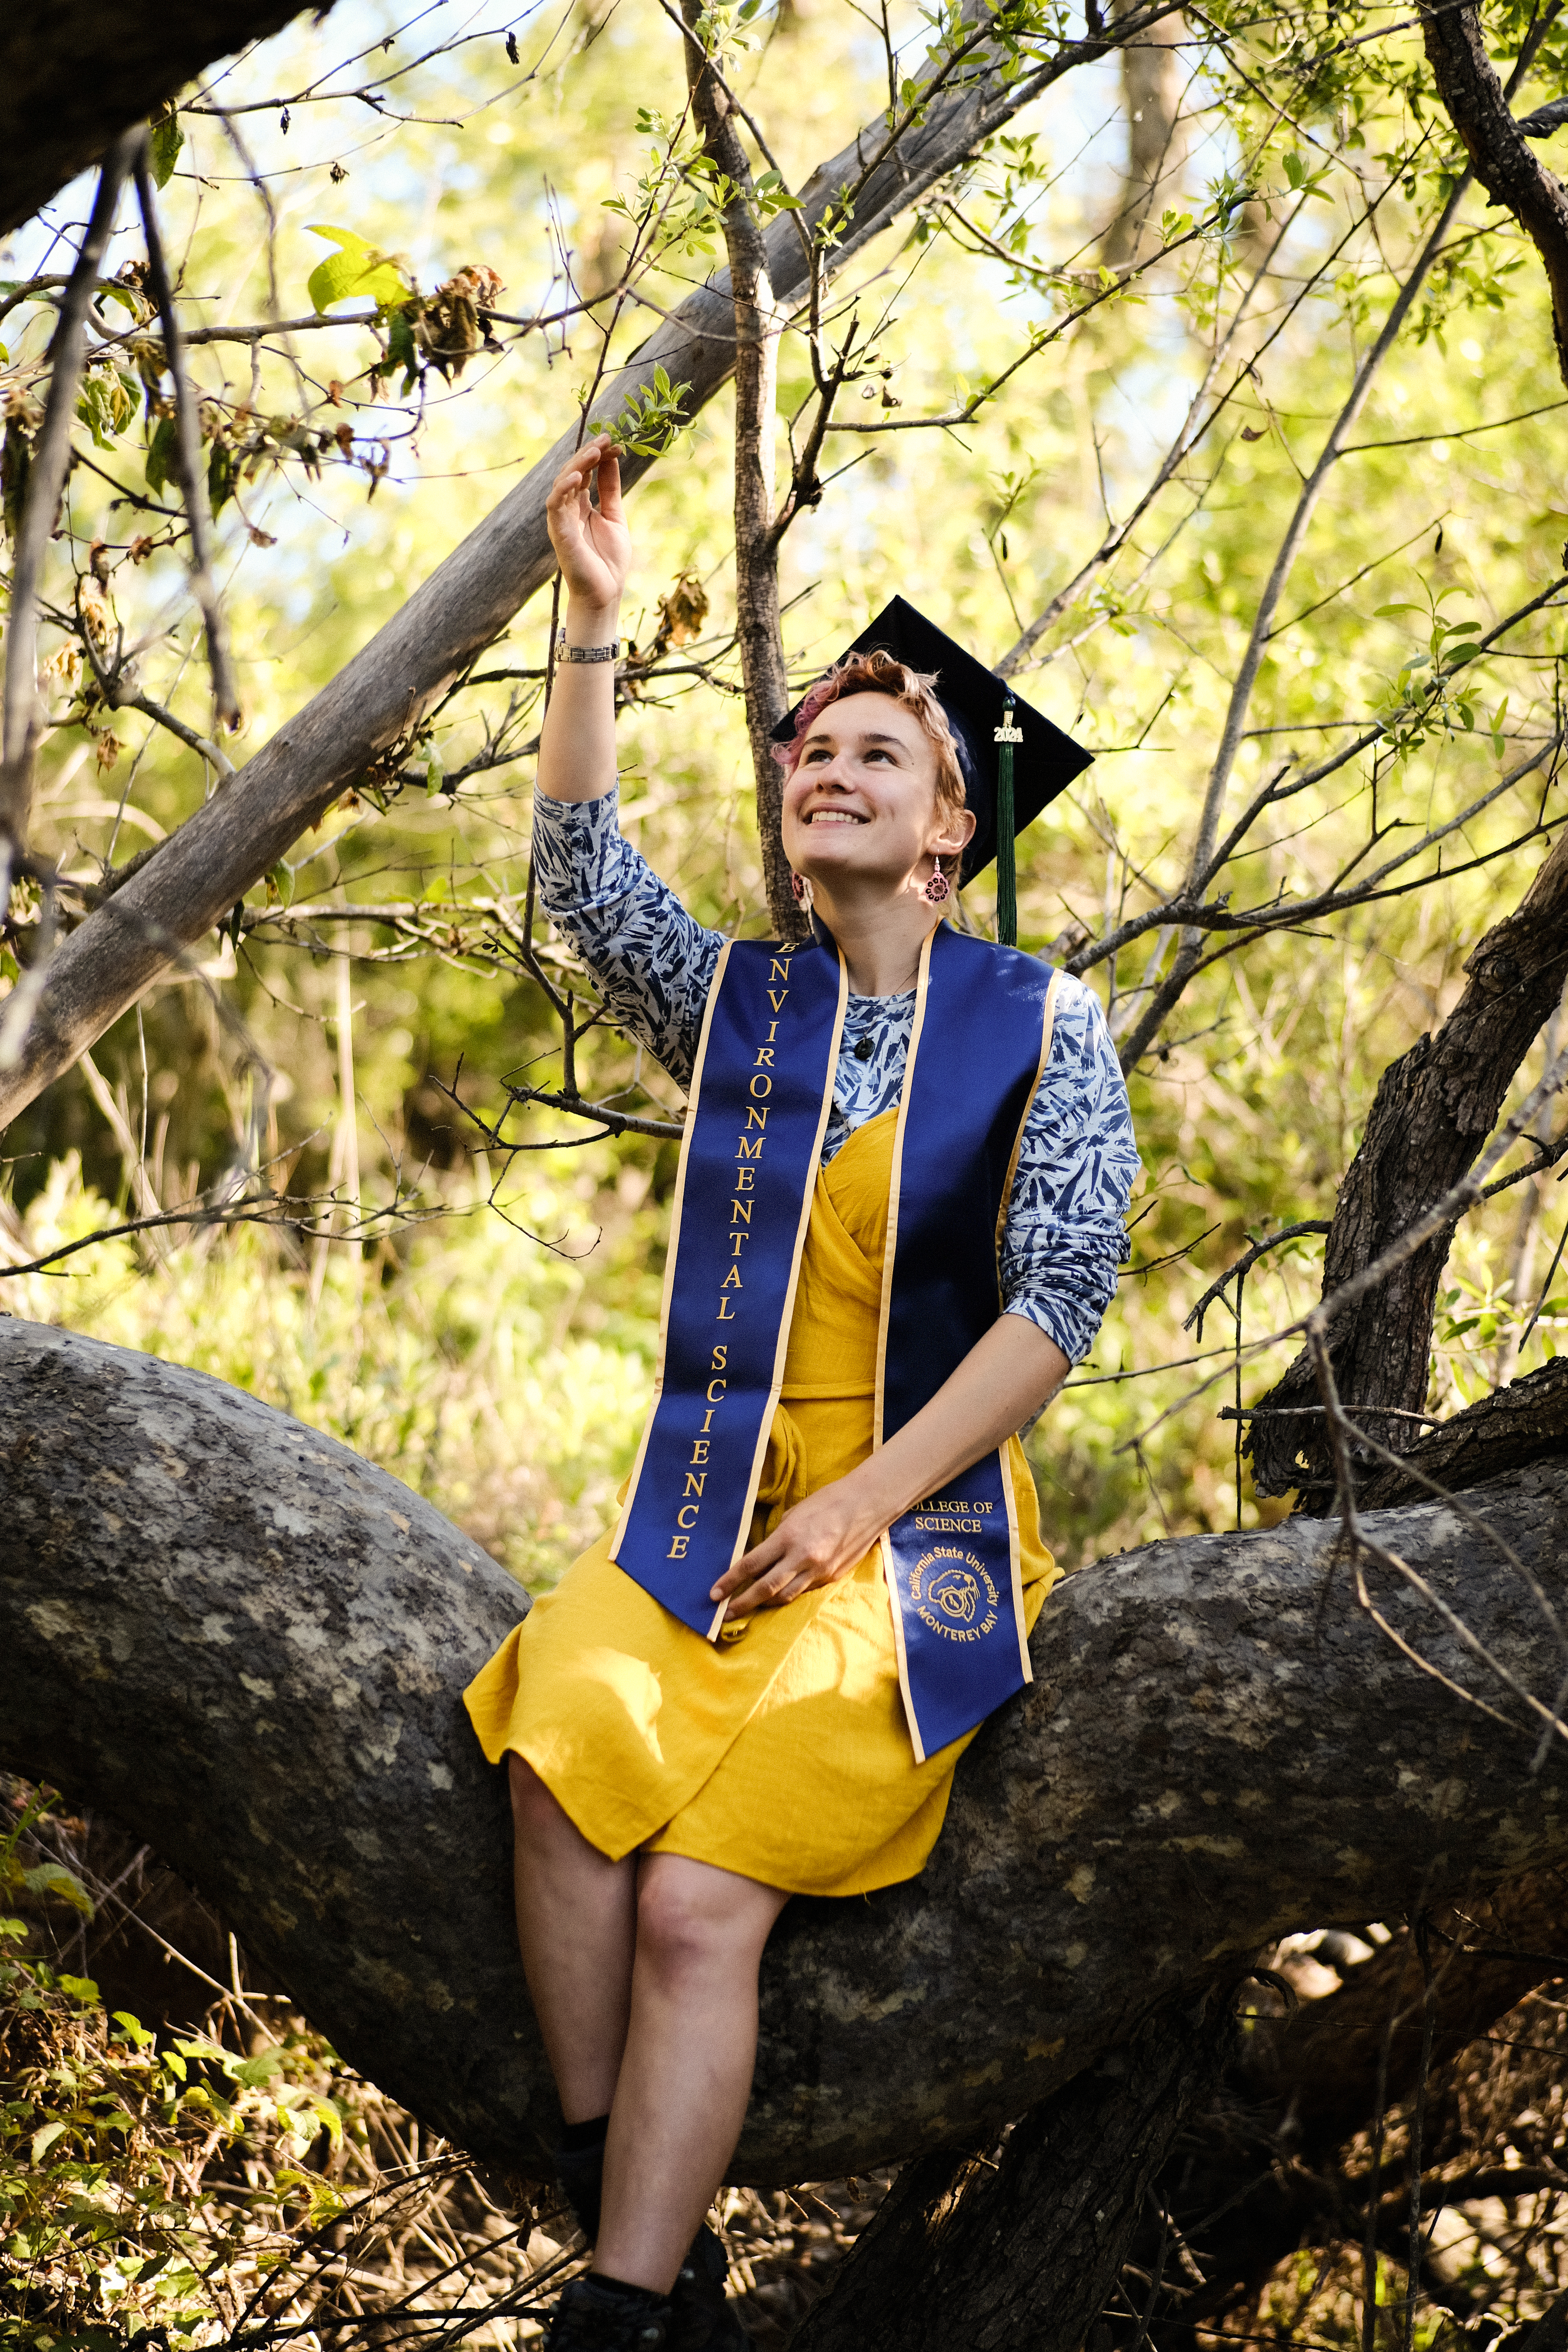 Ellery is sitting on a log, wearing her cap and graduation stole. The stole says 